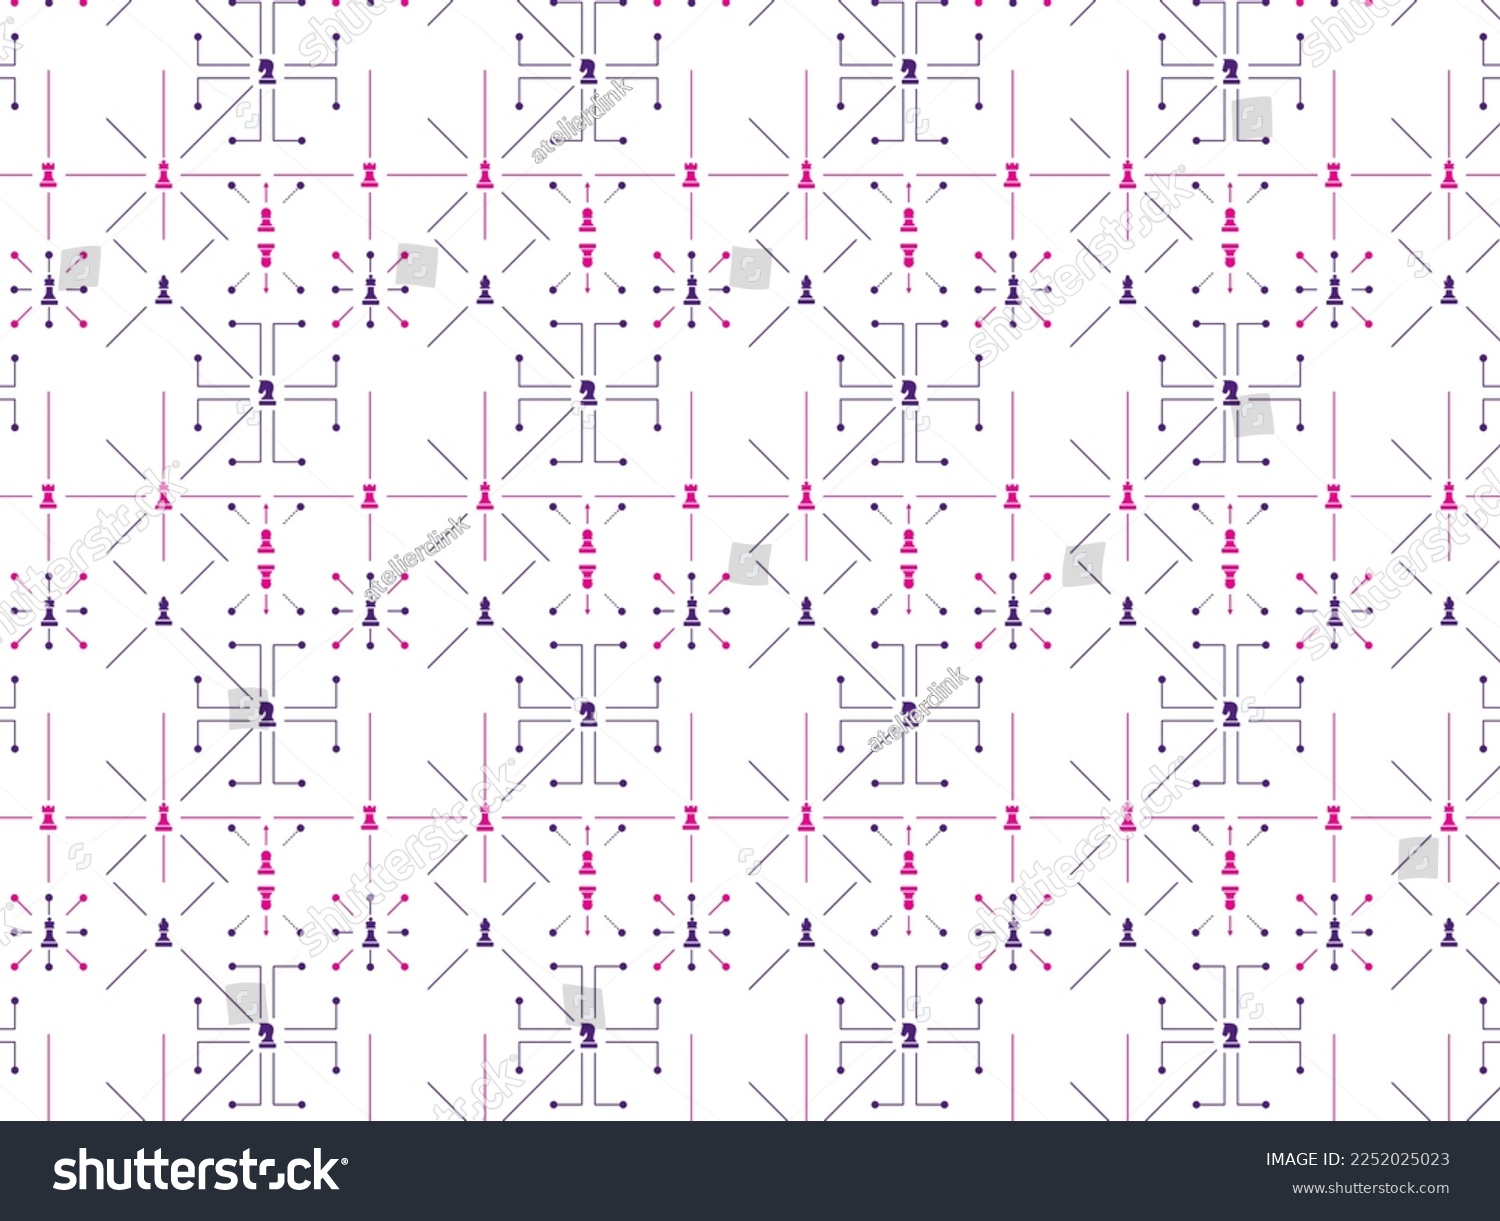 SVG of A seamless pattern, texture from chess pieces and chess moves ideal for fabric, textile and paper targeting chess lovers of all ages. Chess circuits - symbolizing movement, outreach, and limitations.  svg